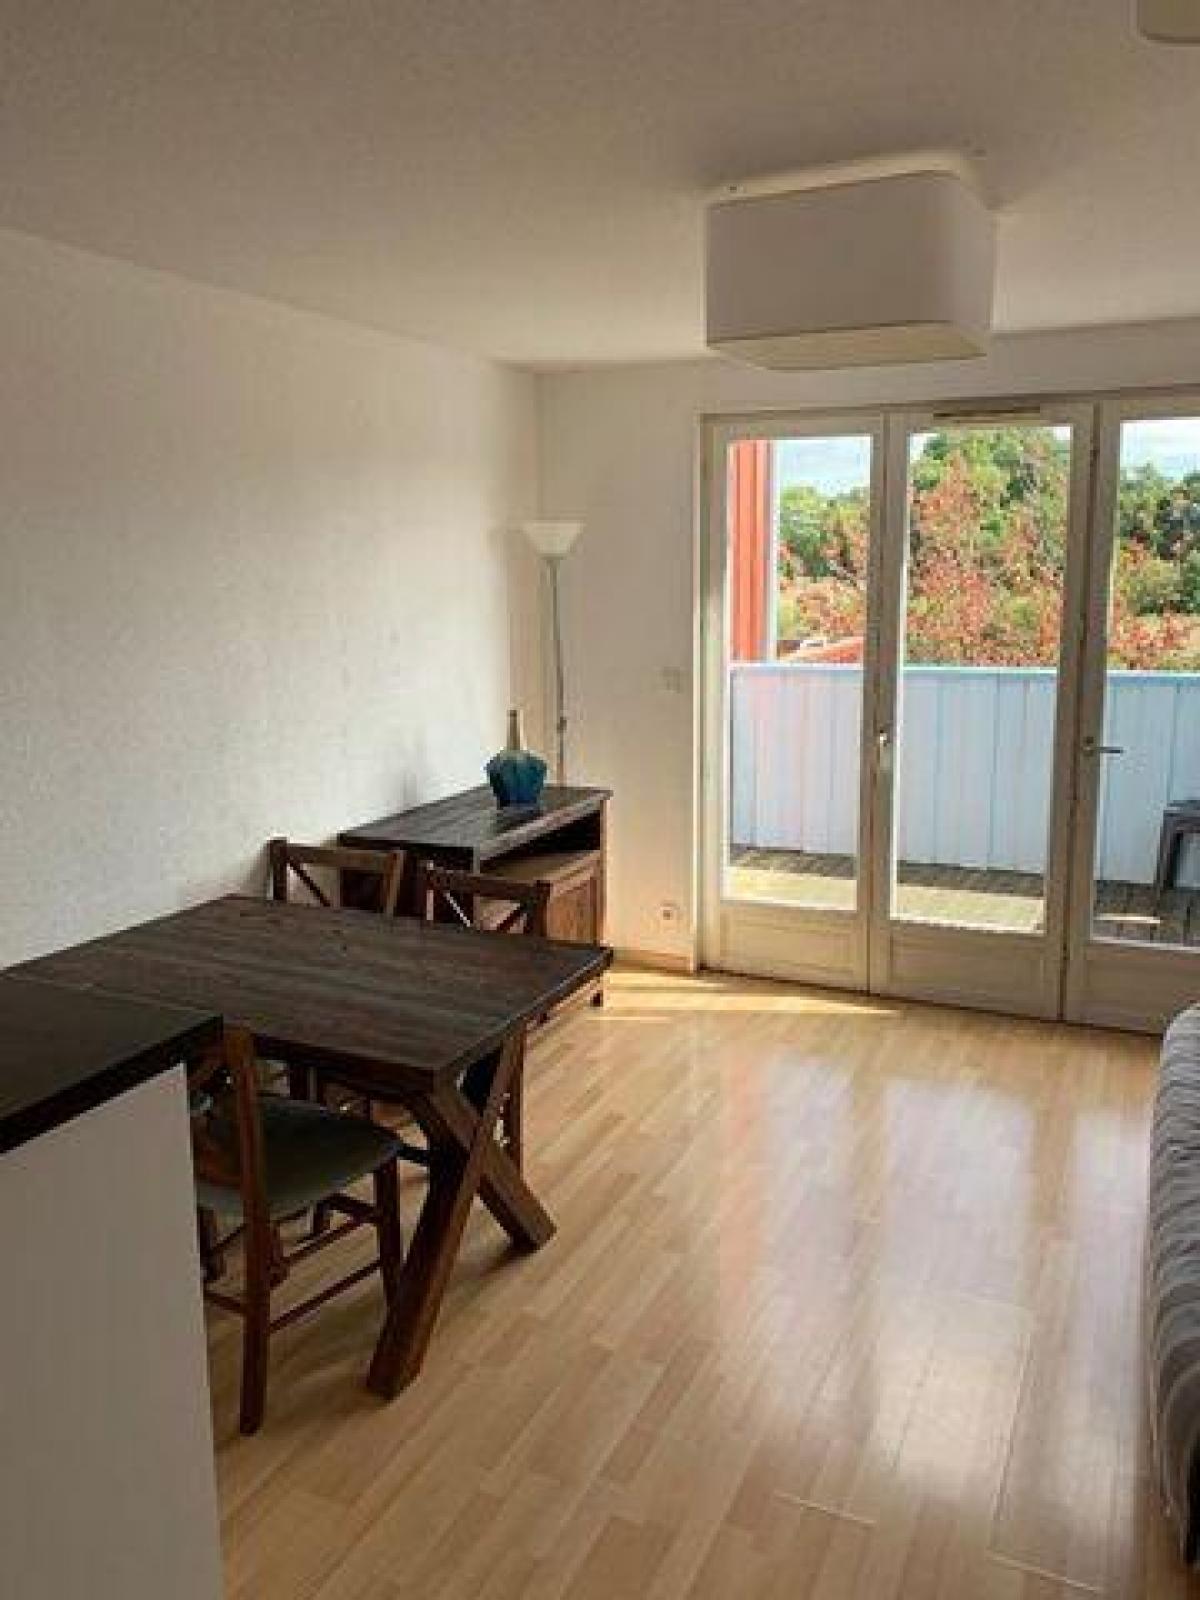 Picture of Condo For Sale in Le Teich, Aquitaine, France